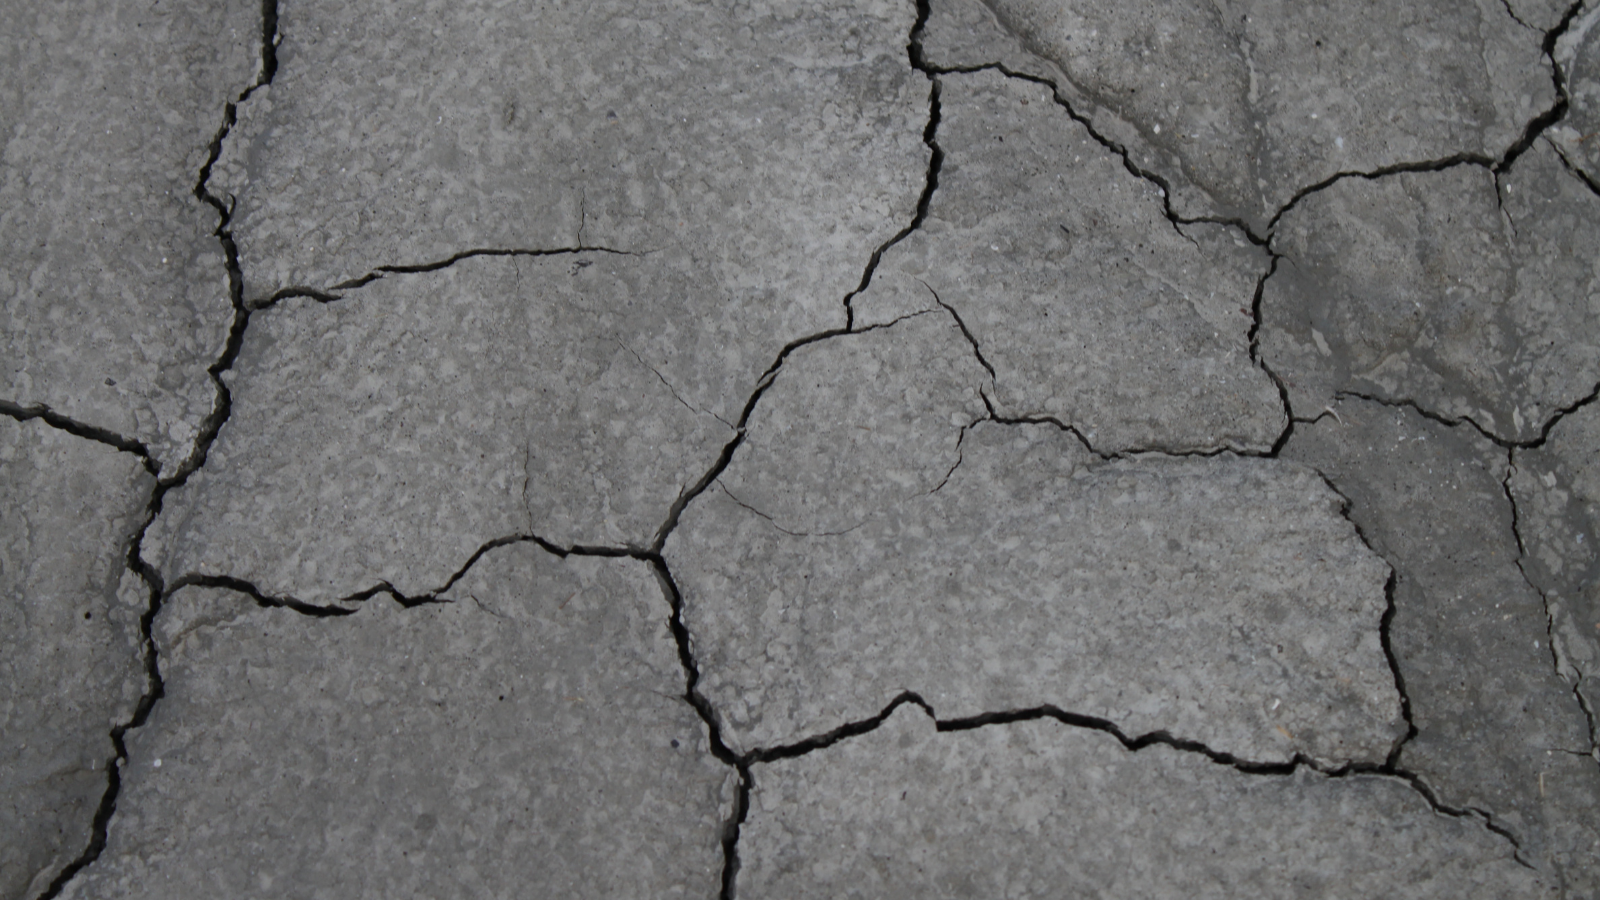 Cracking is the result of alcohol drying out the surface. Using an alcohol-based wipe or spray strips away moisture and protective coating and layers.